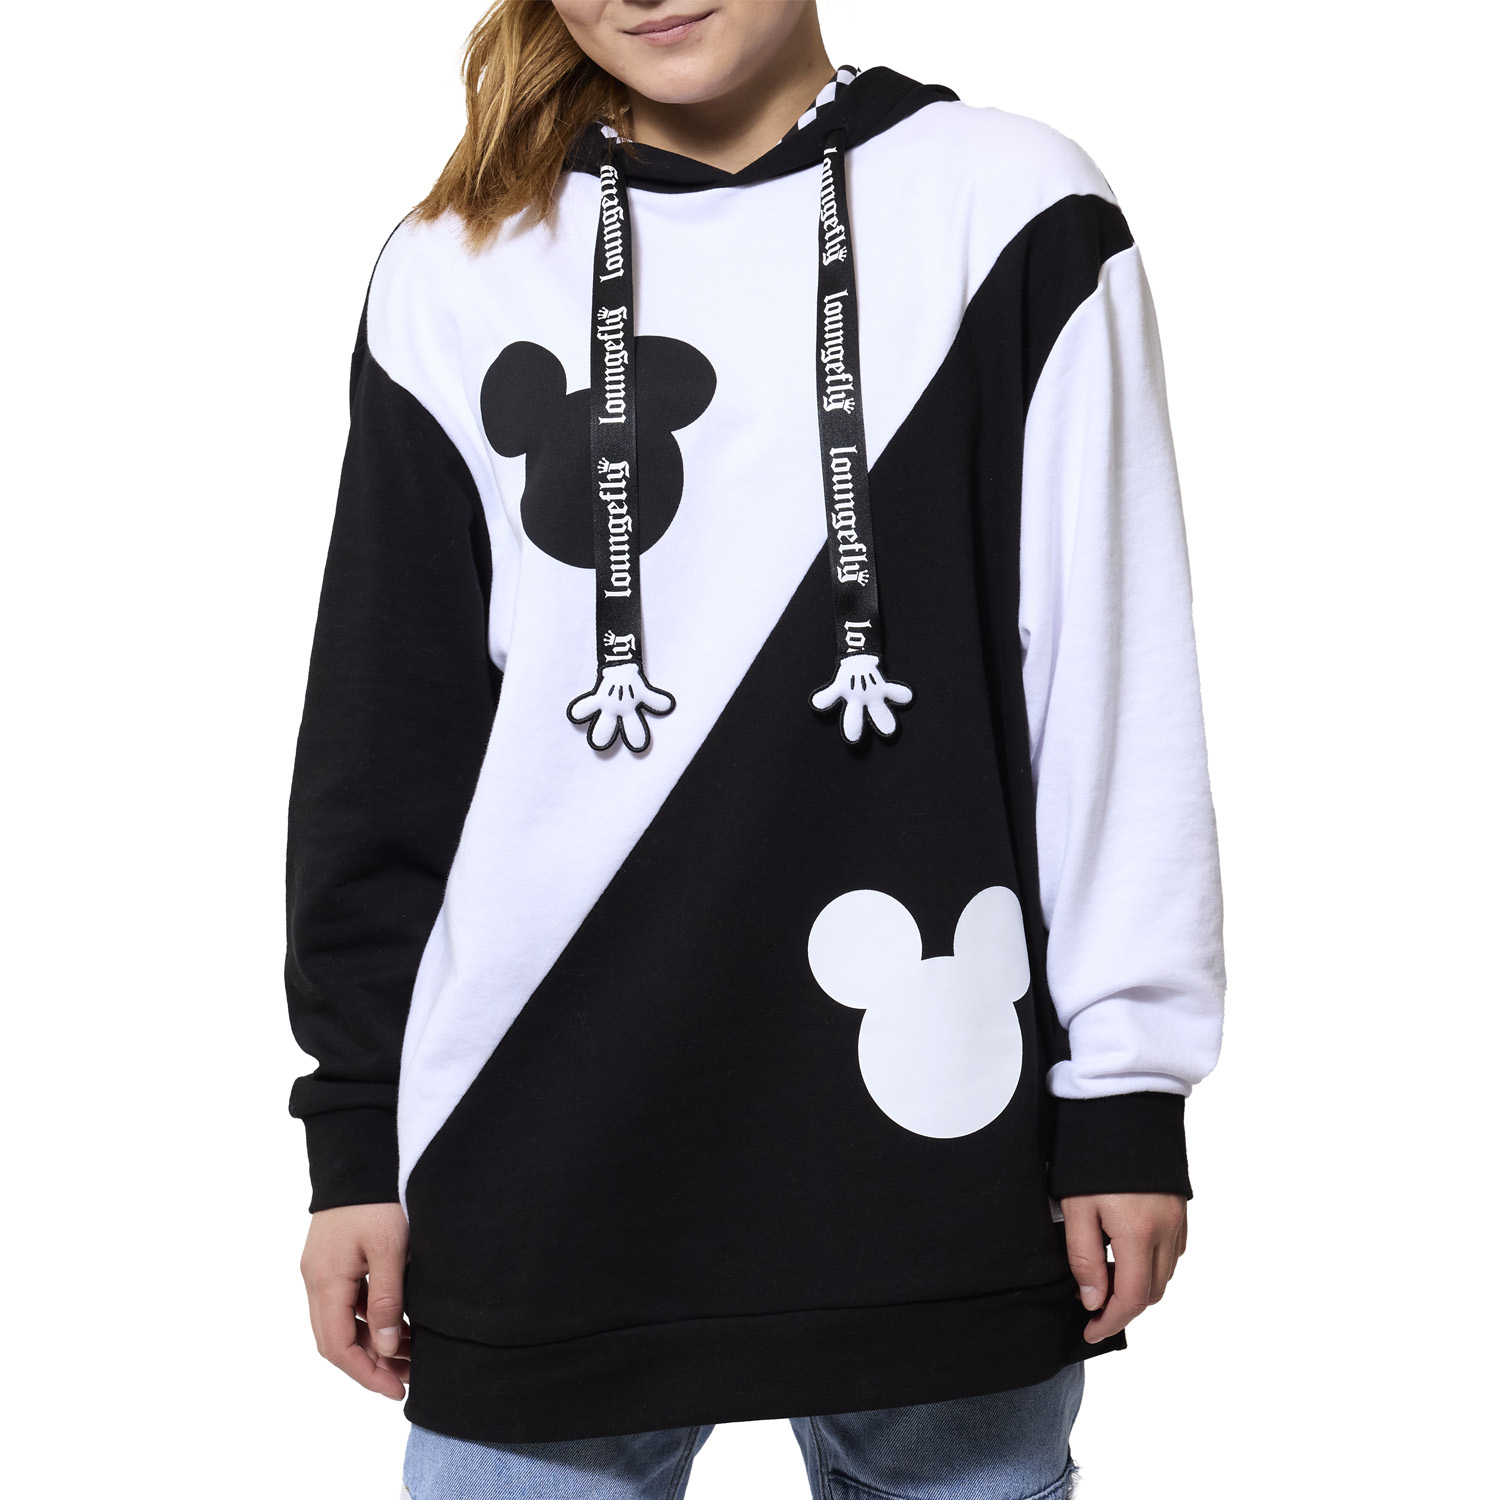 XL ladies White 2021 Mickey Mouse hooded sweatshirt - clothing